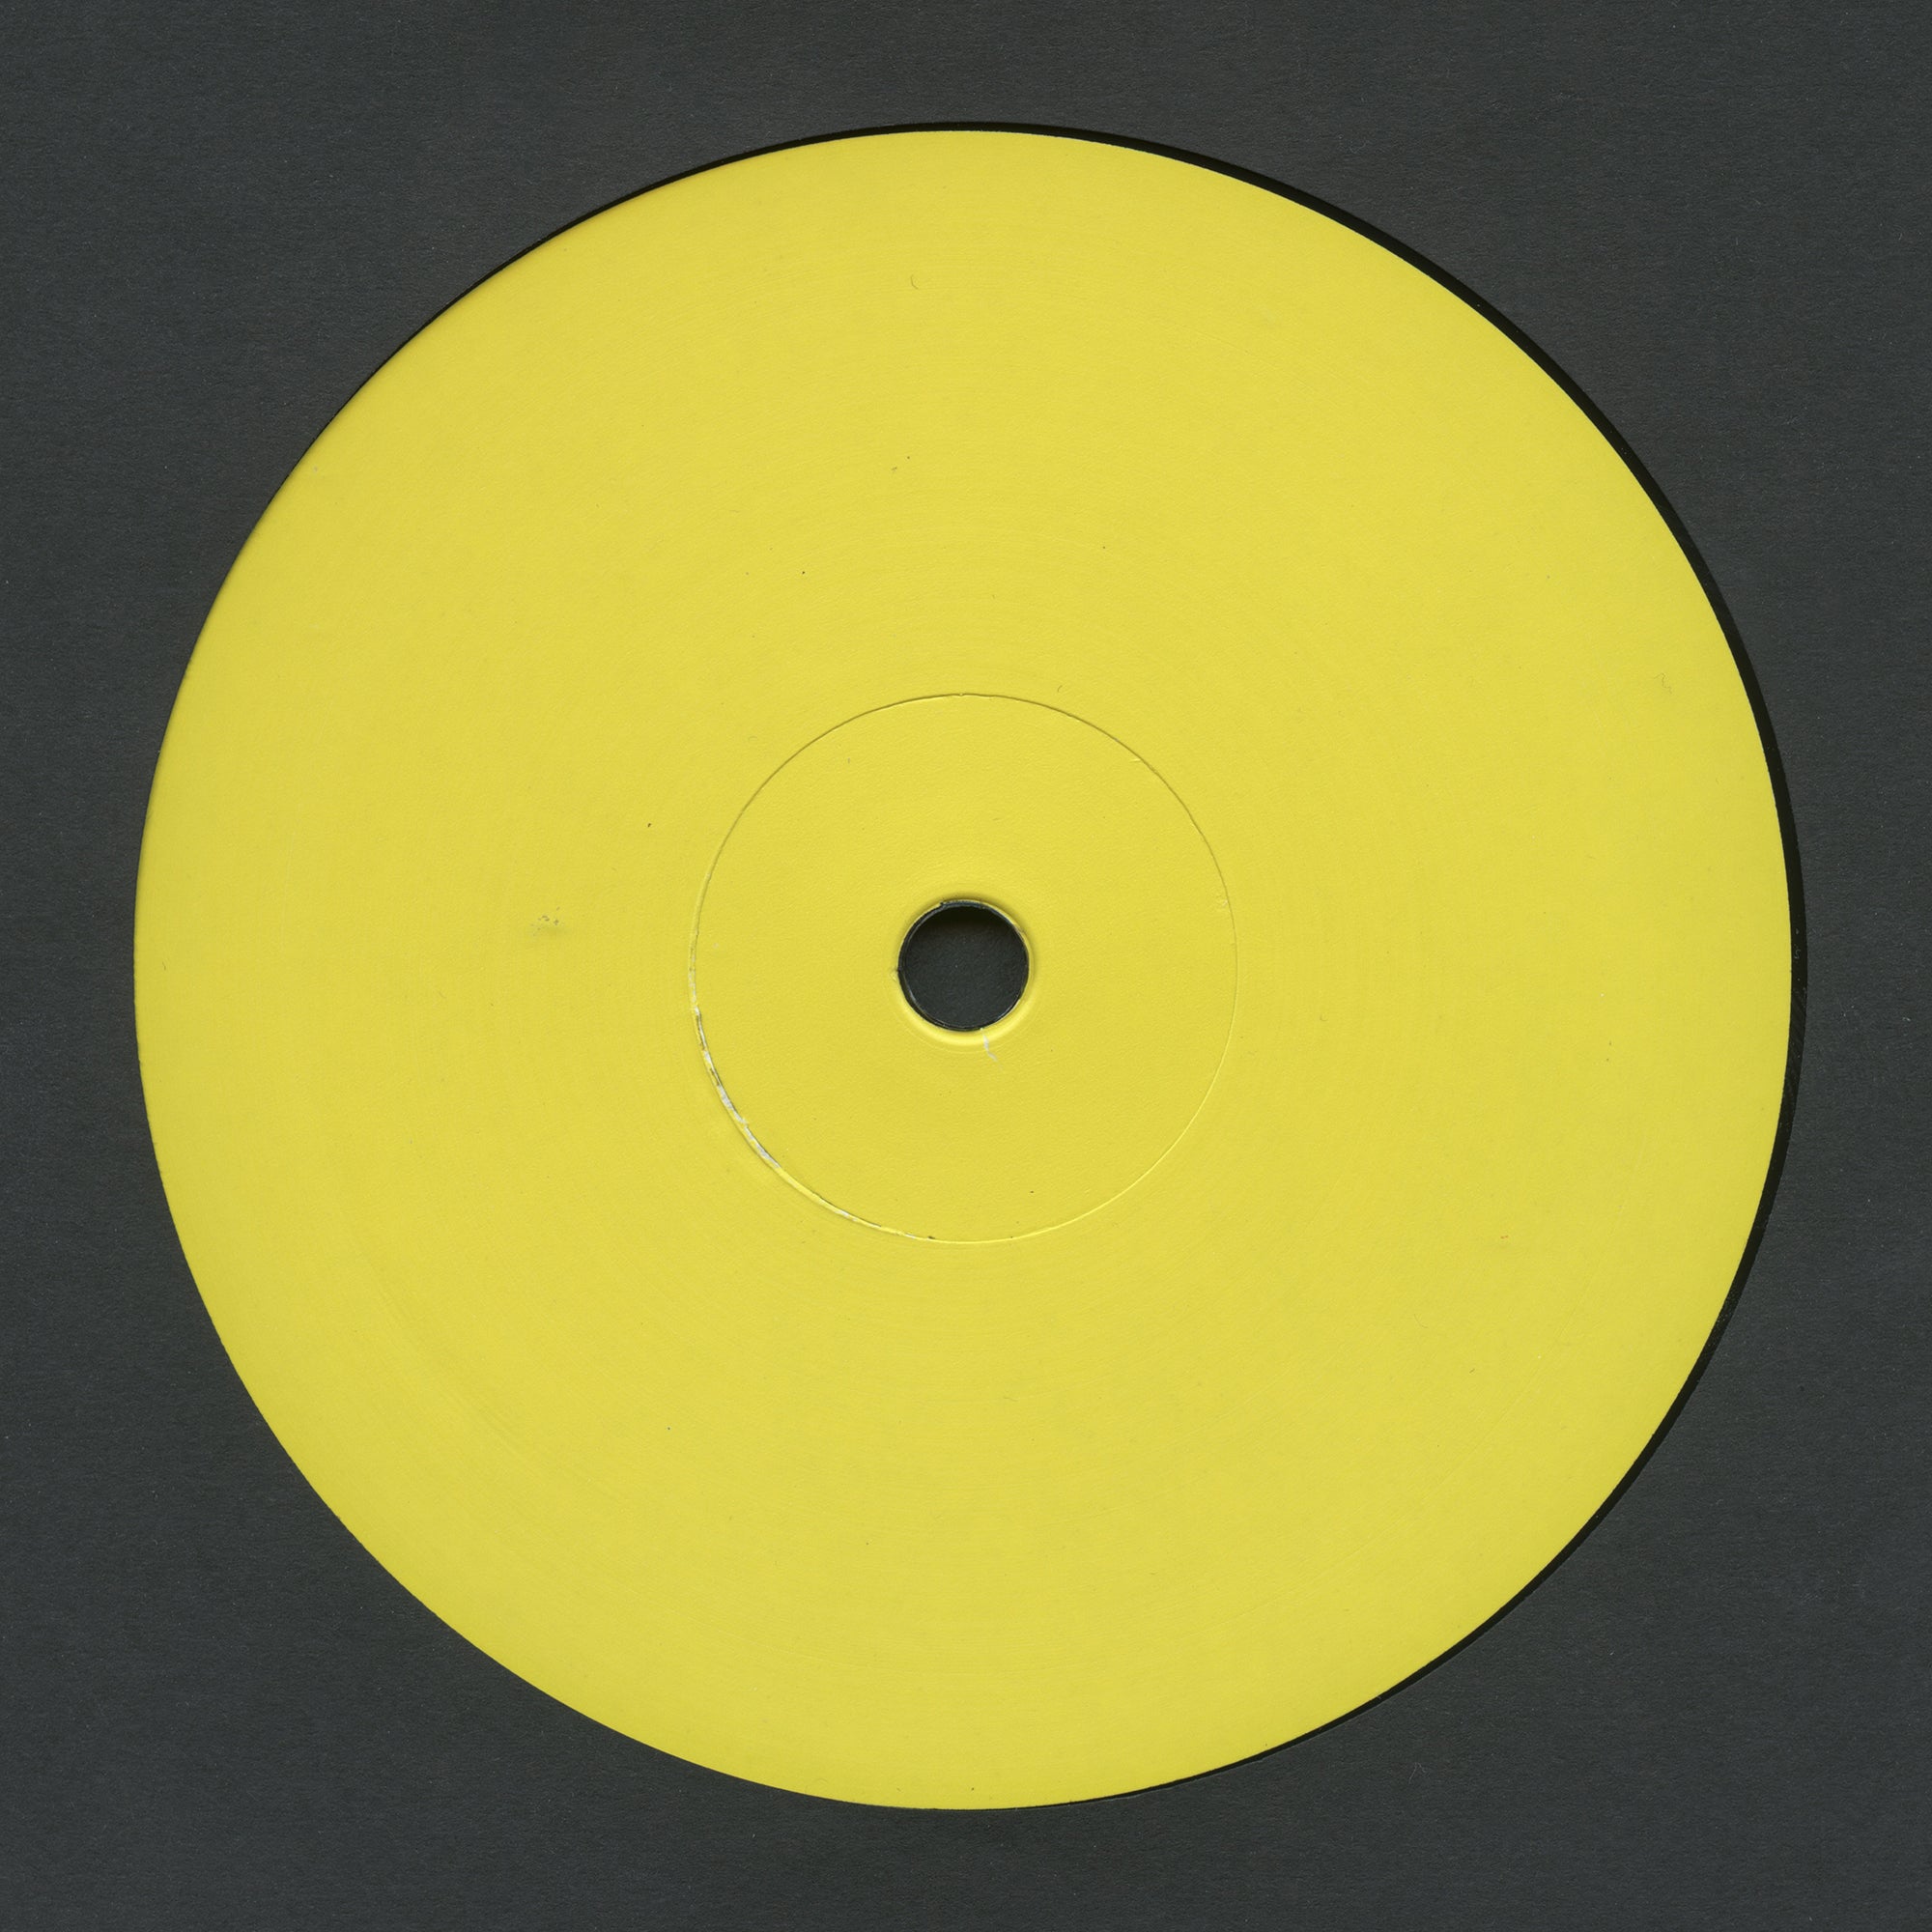 STENNY 'WIPE OUT / PERMISSION' 12"